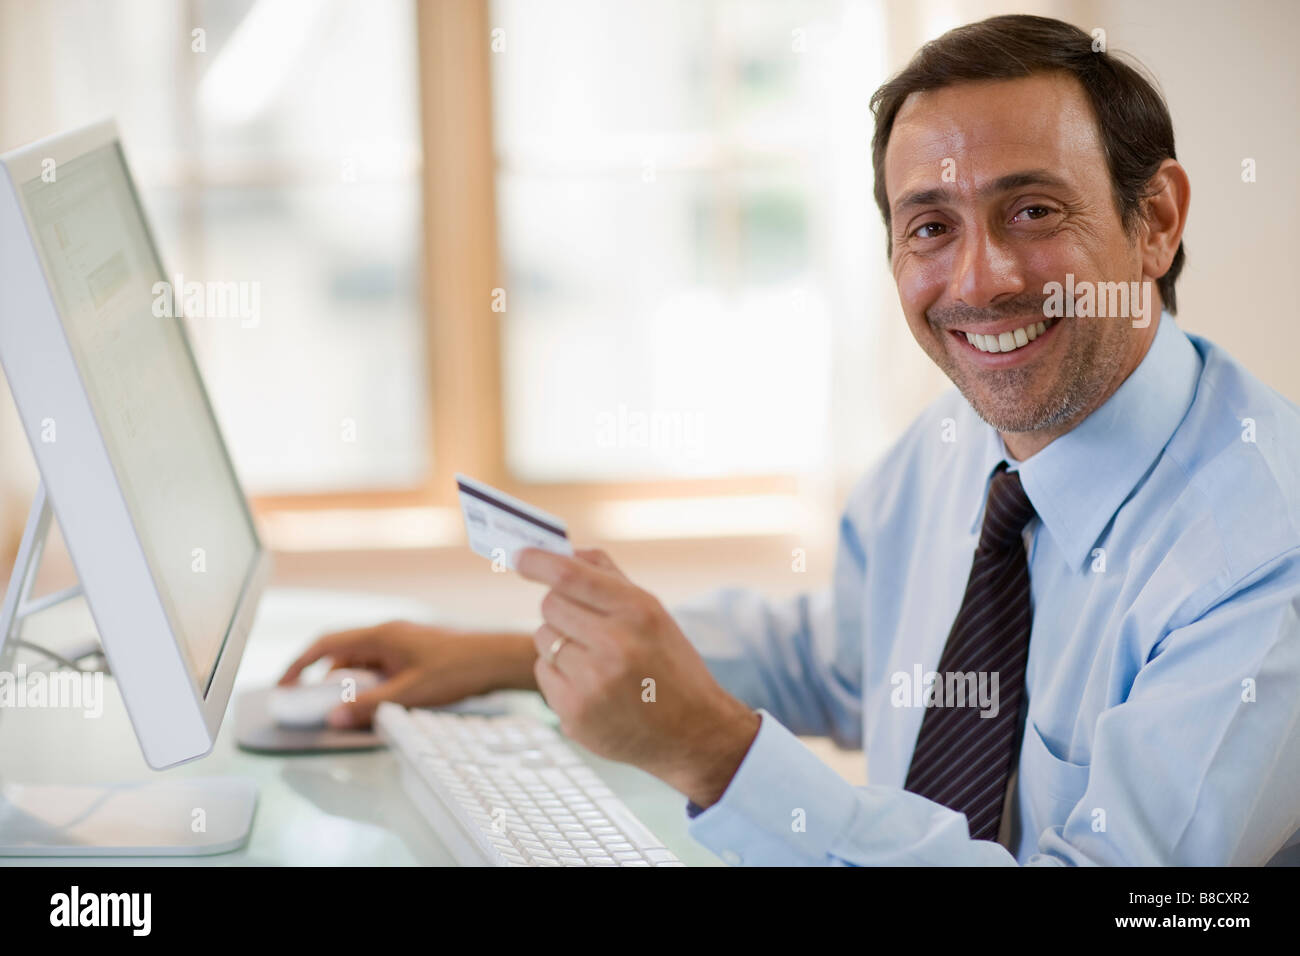 Smiling man shopping online with credit card and computer Banque D'Images